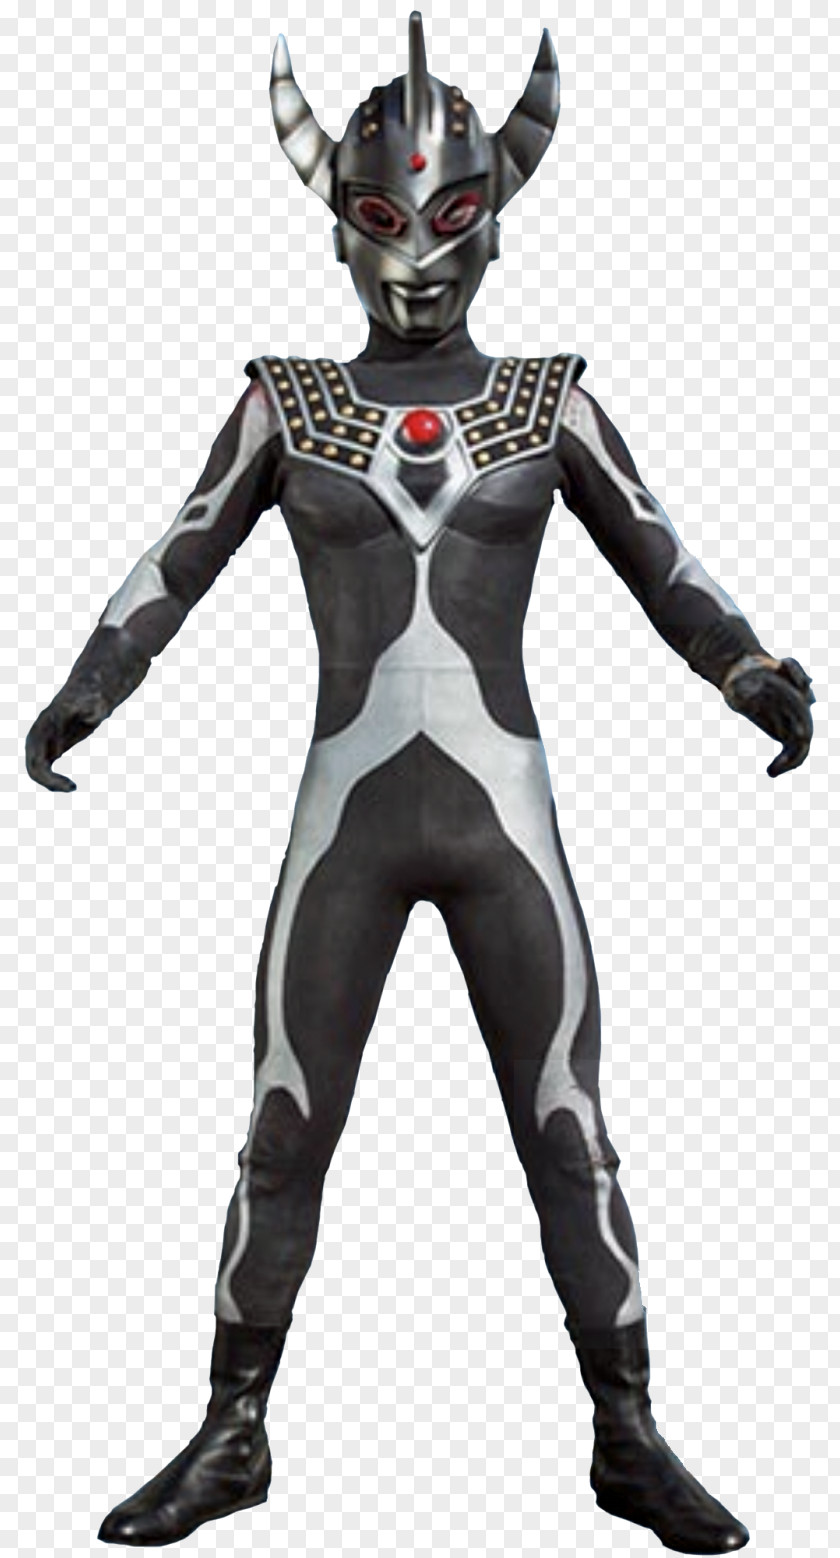 Caw Costume Design Black Panther Suit Toy PNG